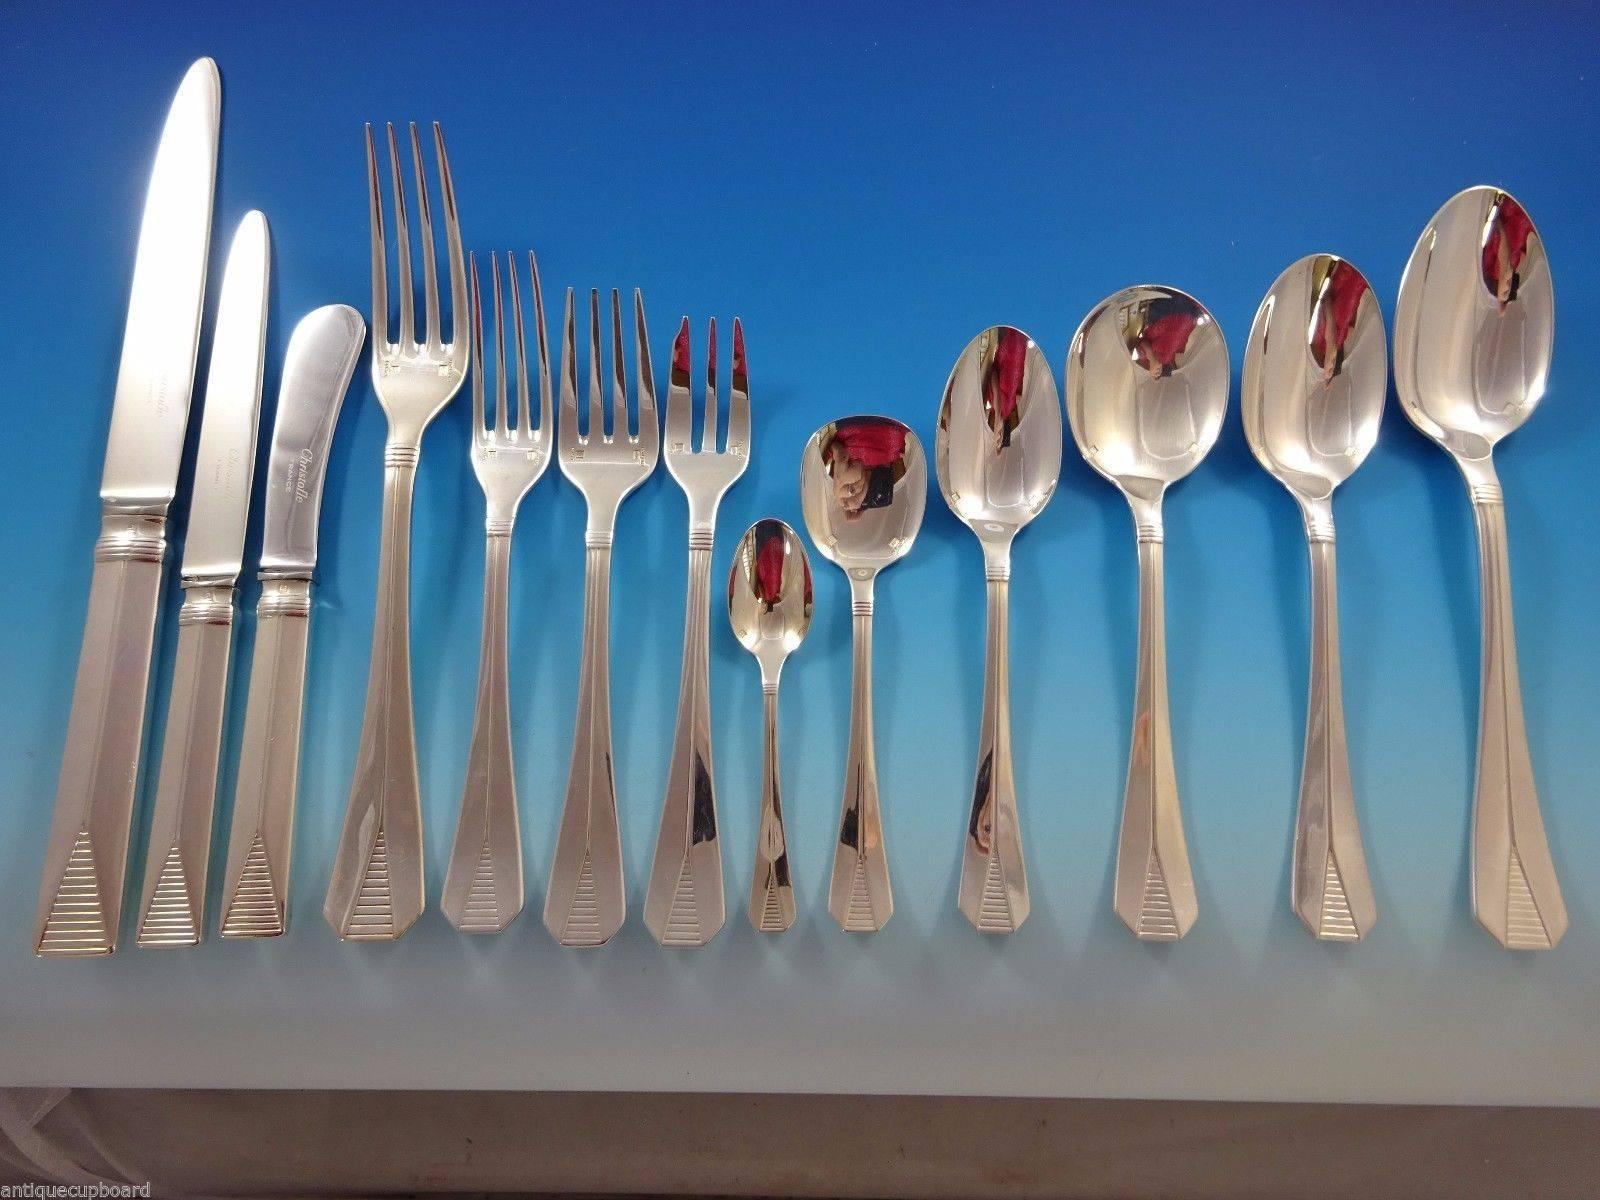 Christofle set.

Large fabulous Atlantide by Christofle (France) silver plated dinner flatware set - 116 pieces. This pattern has a great look! This set includes:

Eight dinner size knives, 9 7/8